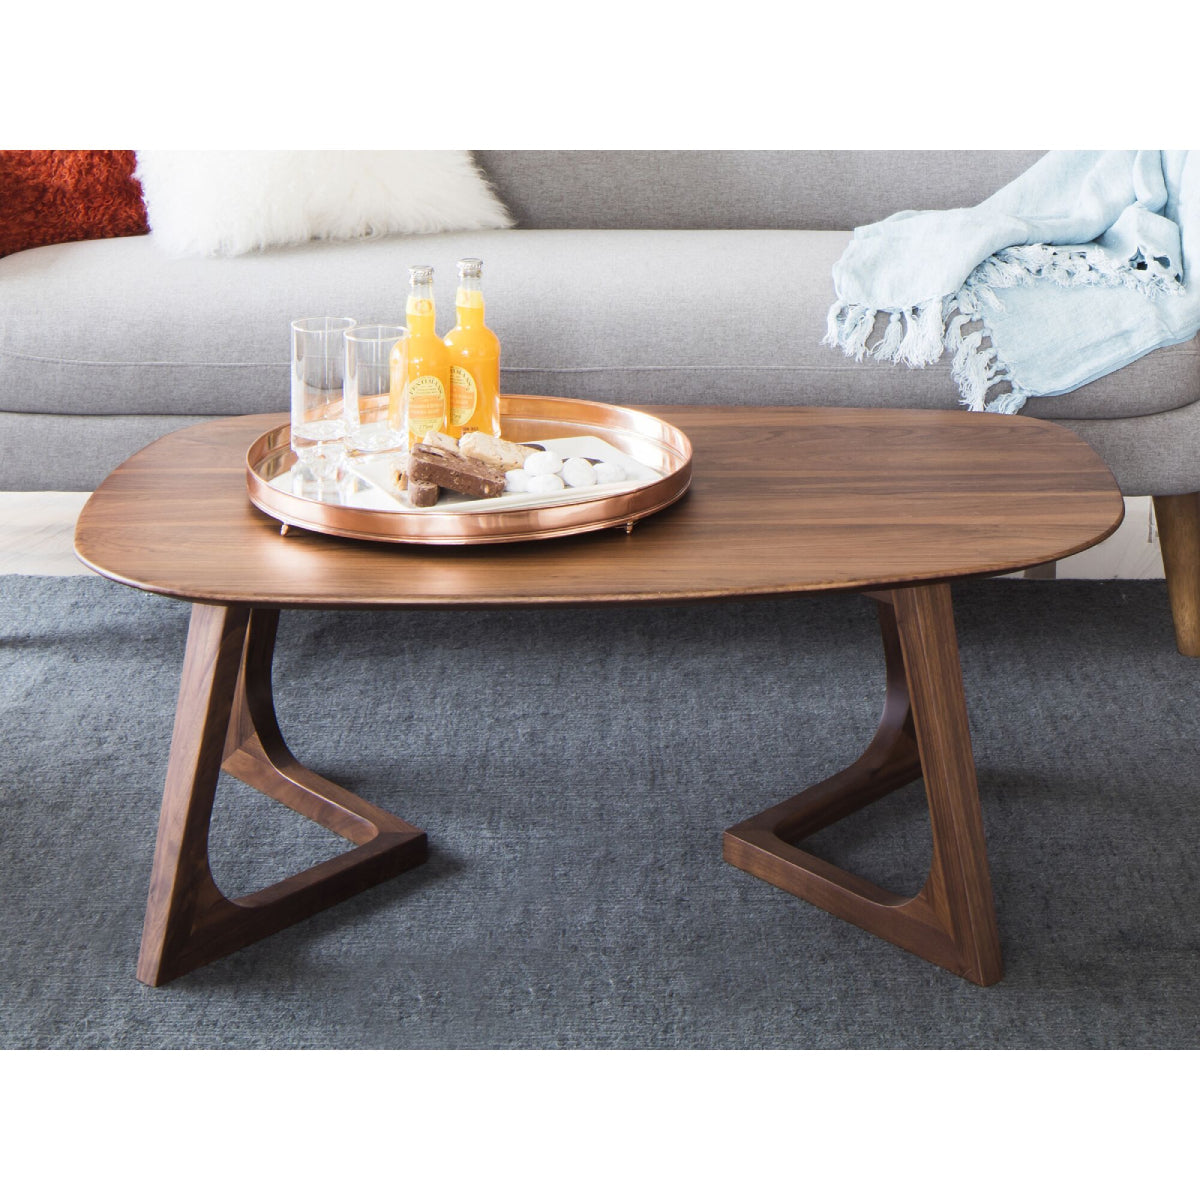 Load image into Gallery viewer, Godenza Coffee Table Small Coffee Tables Moe&amp;#39;s     Four Hands, Burke Decor, Mid Century Modern Furniture, Old Bones Furniture Company, Old Bones Co, Modern Mid Century, Designer Furniture, https://www.oldbonesco.com/
